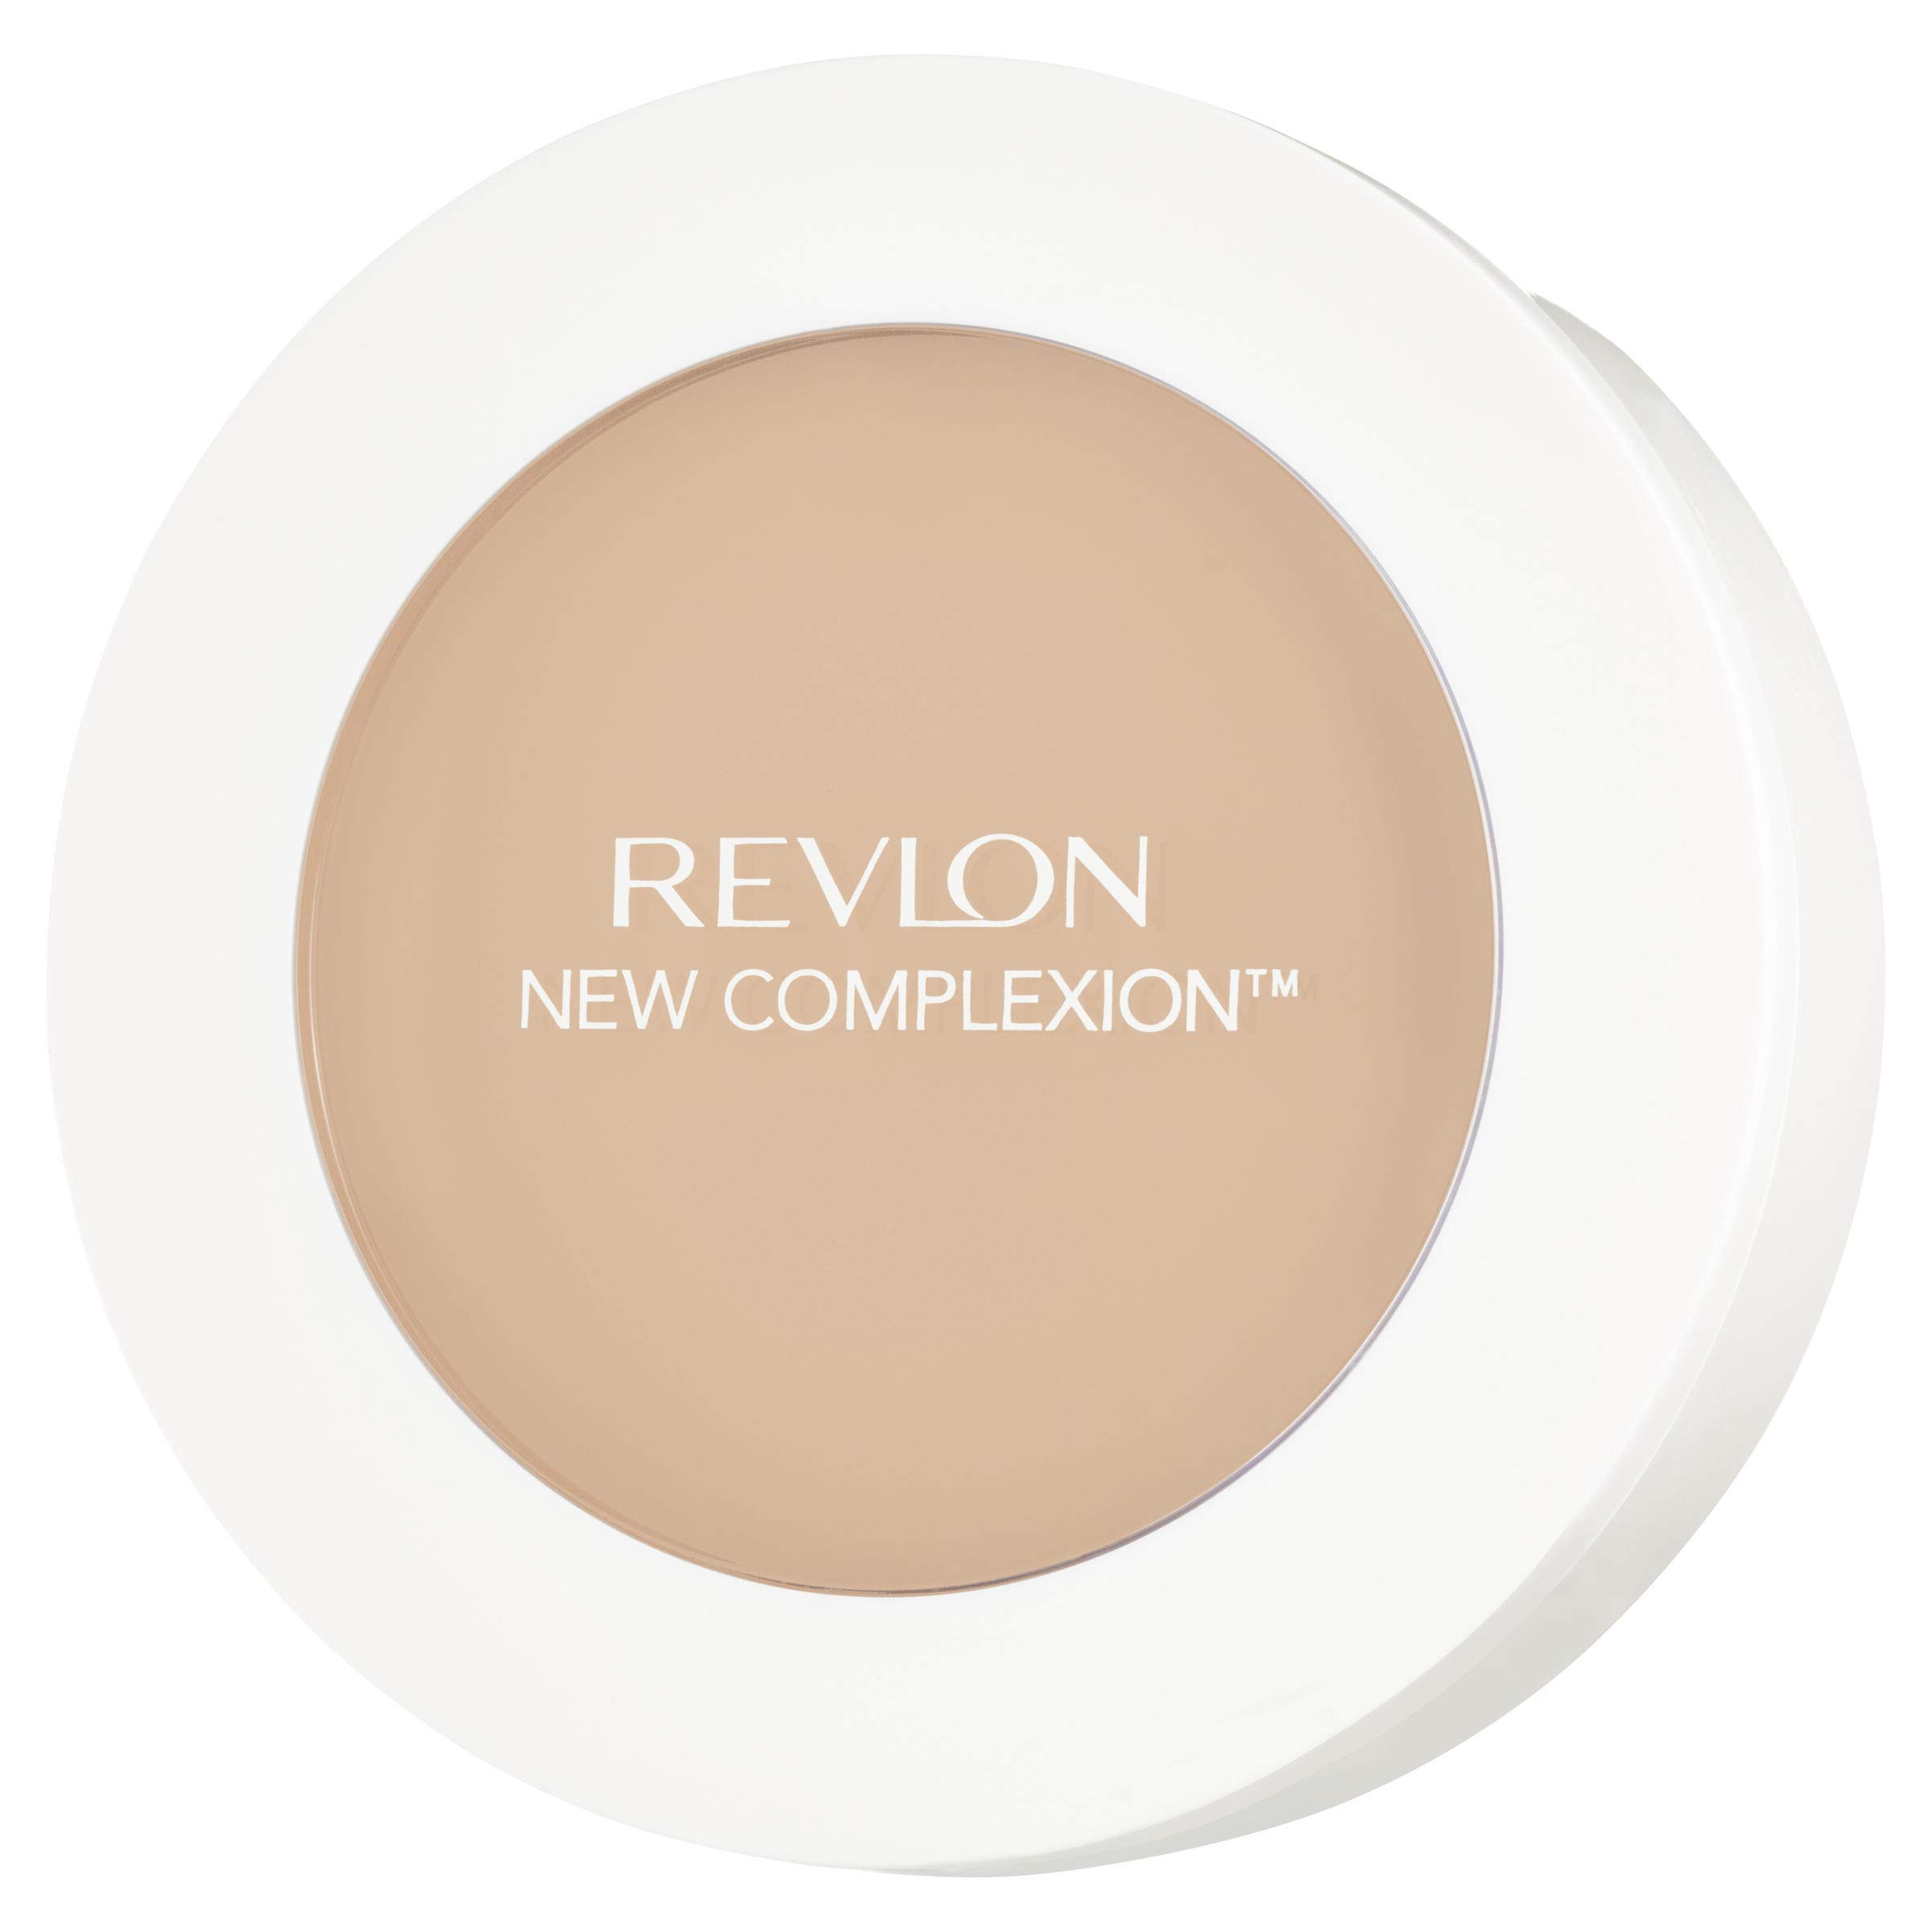 Revlon Foundation, New Complexion One-Step Face Makeup, Longwear Light Coverage with Matte Finish, SPF 15, Cream to Powder Formula, Oil Free, 003 Sand Beige, 0.35 Oz